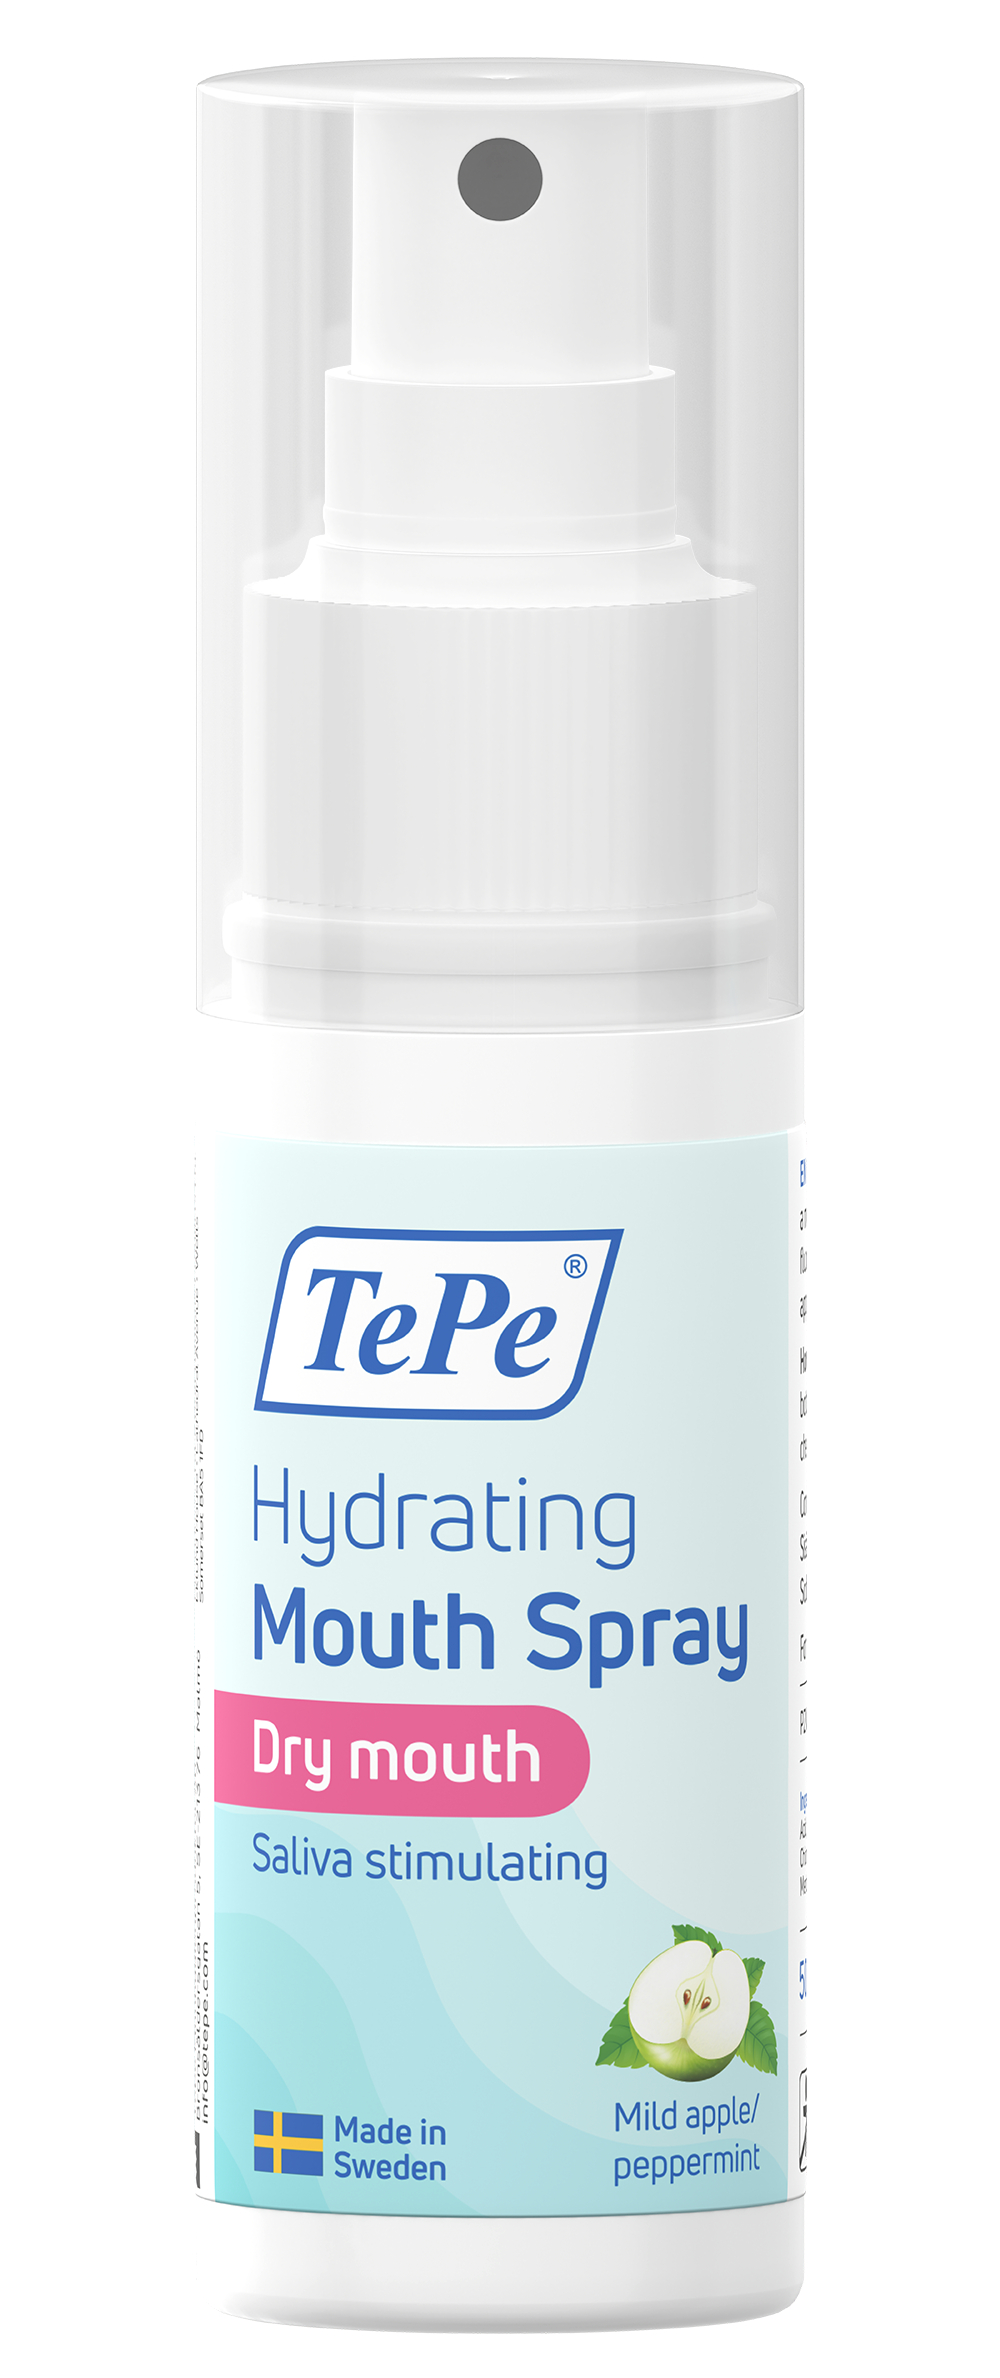 TePe 862314 hydrating mouth spray front INT High resolution JPEG 6880